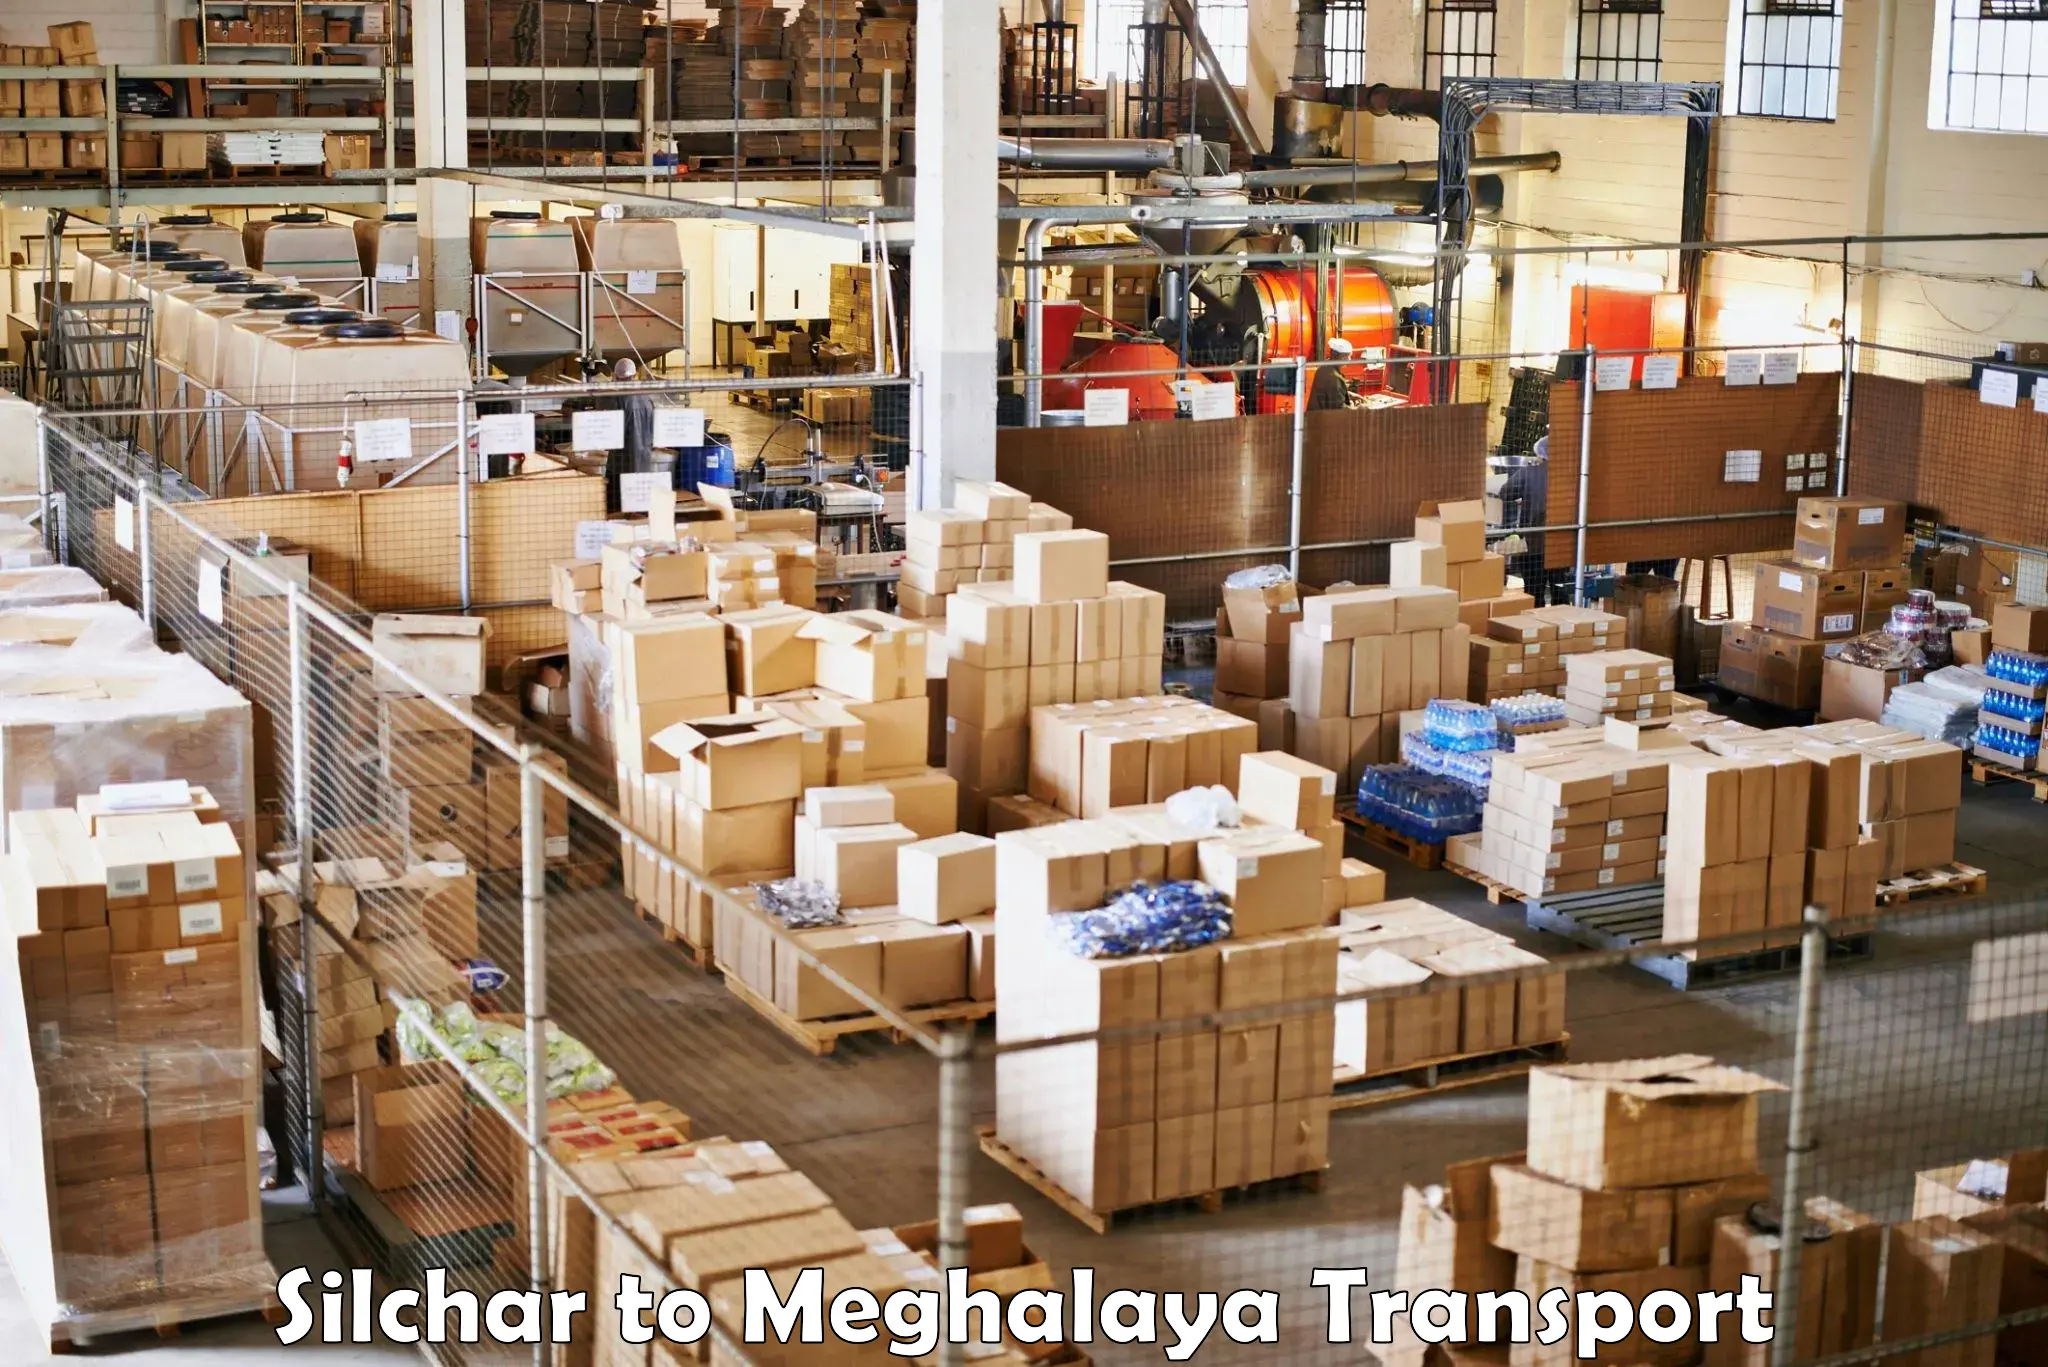 Truck transport companies in India Silchar to Jowai